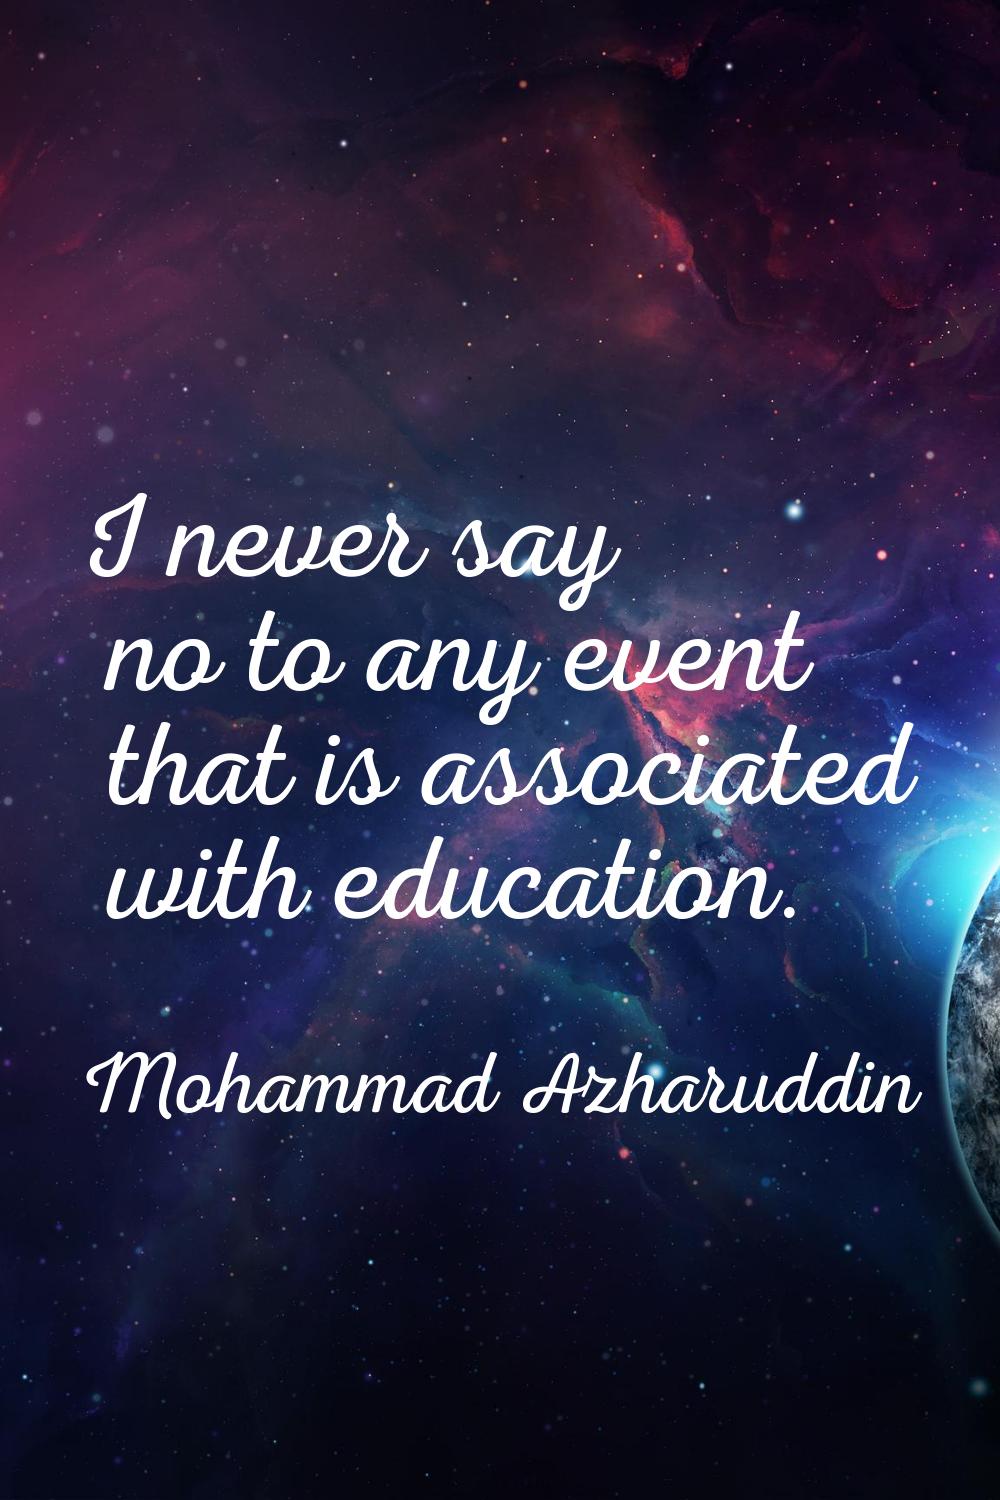 I never say no to any event that is associated with education.